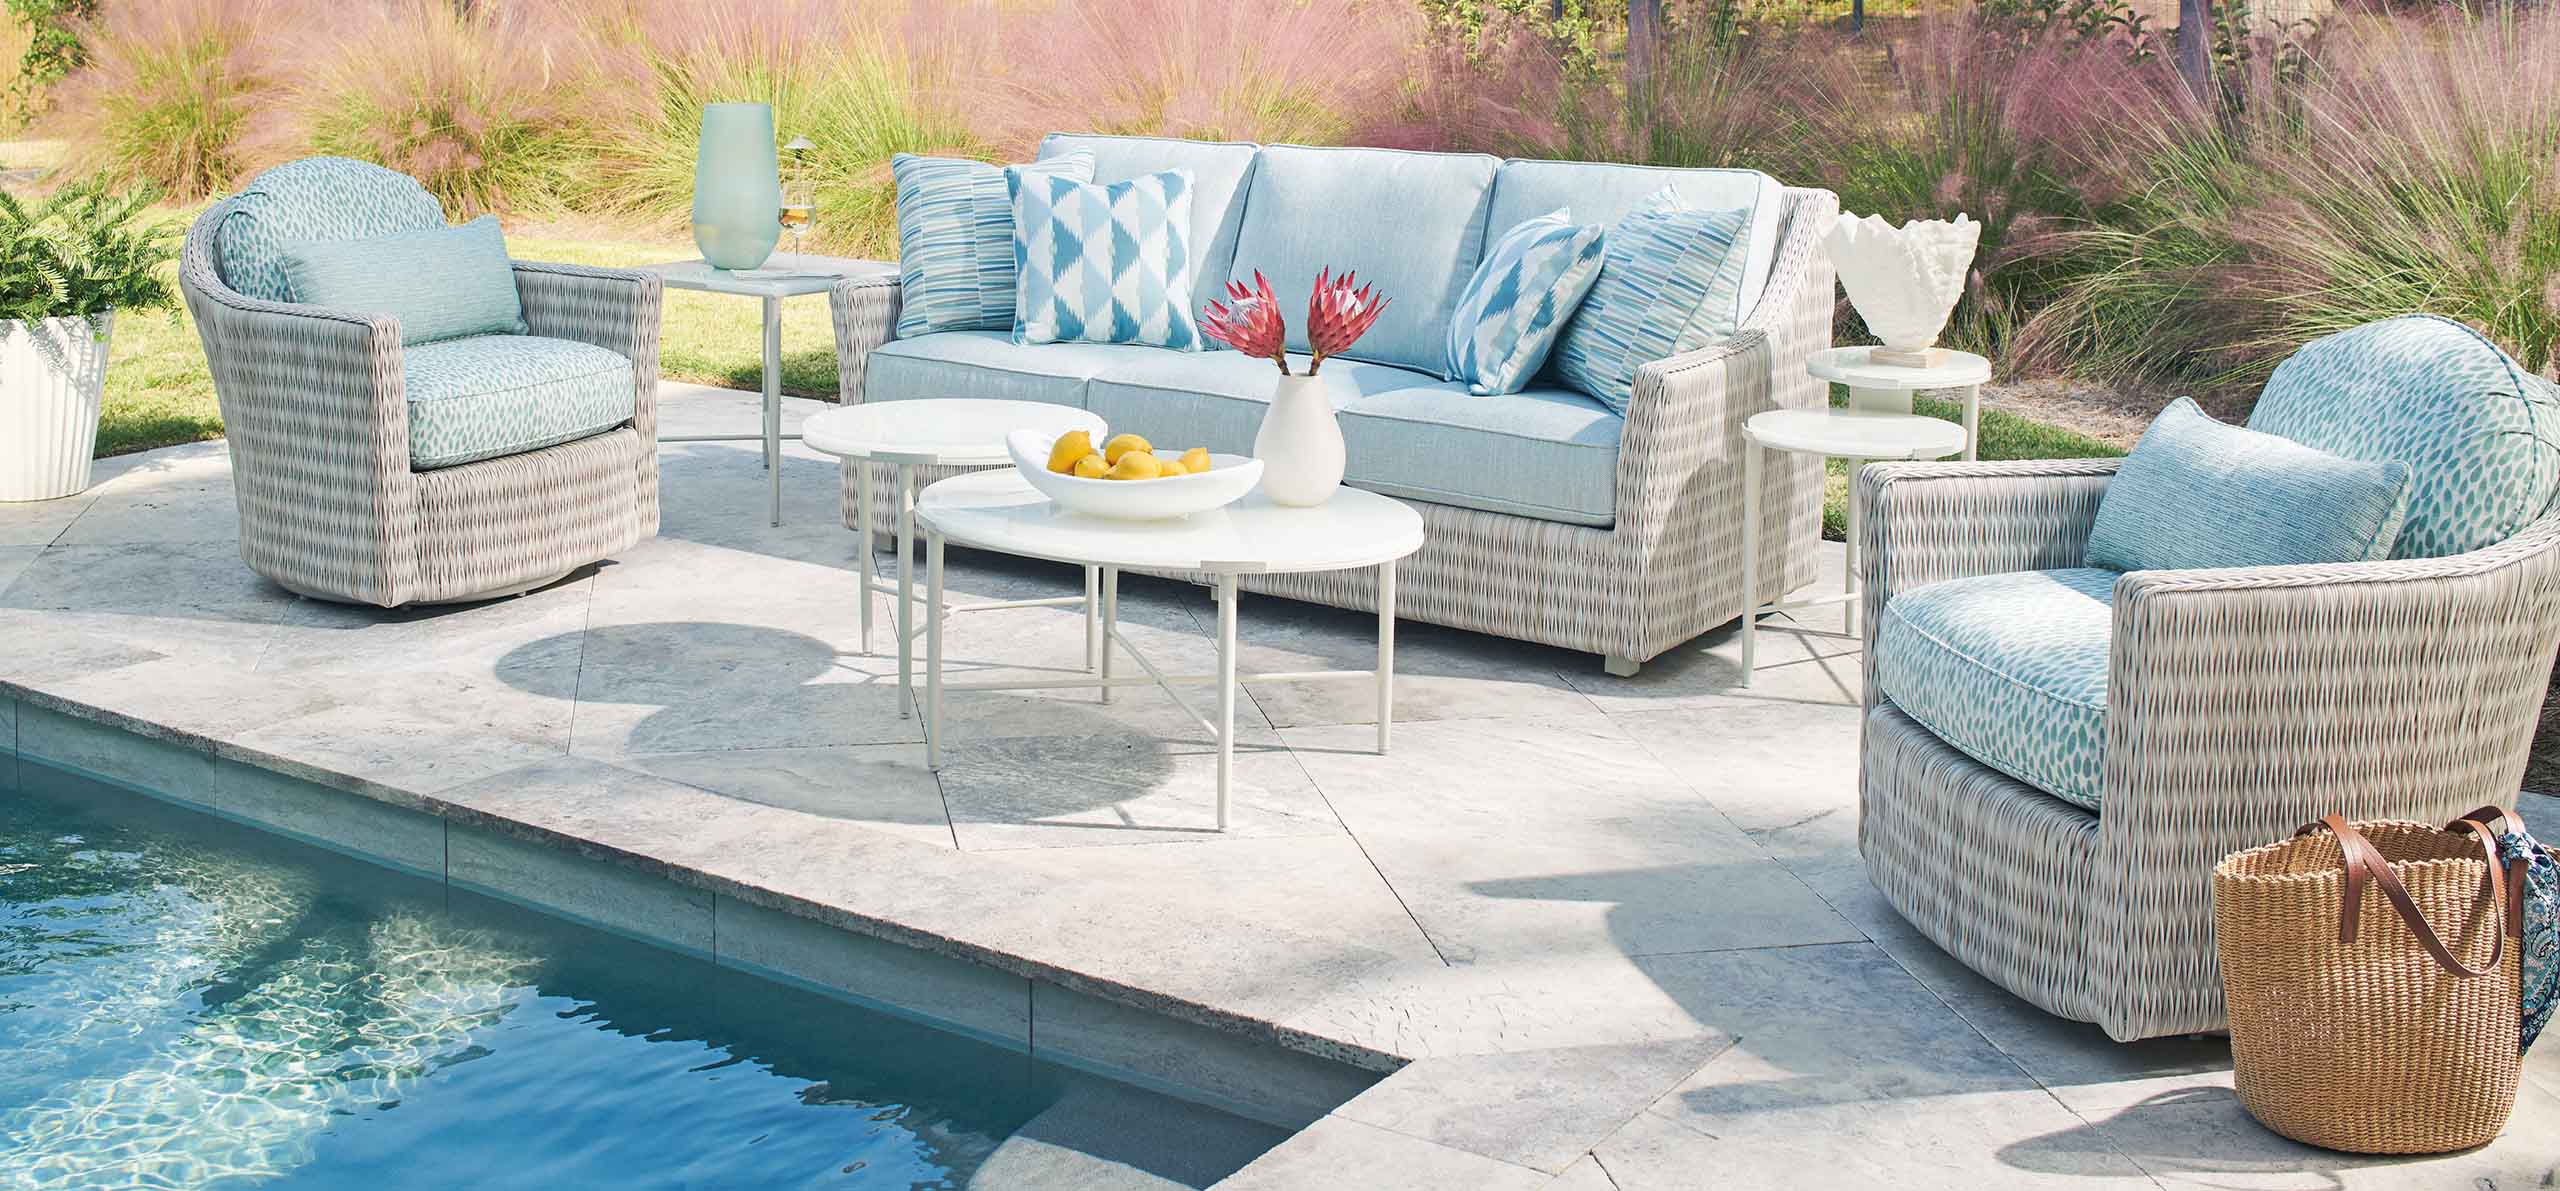 Enjoy designer savings with the Tommy Bahama Outdoor Living Pre-Season Event